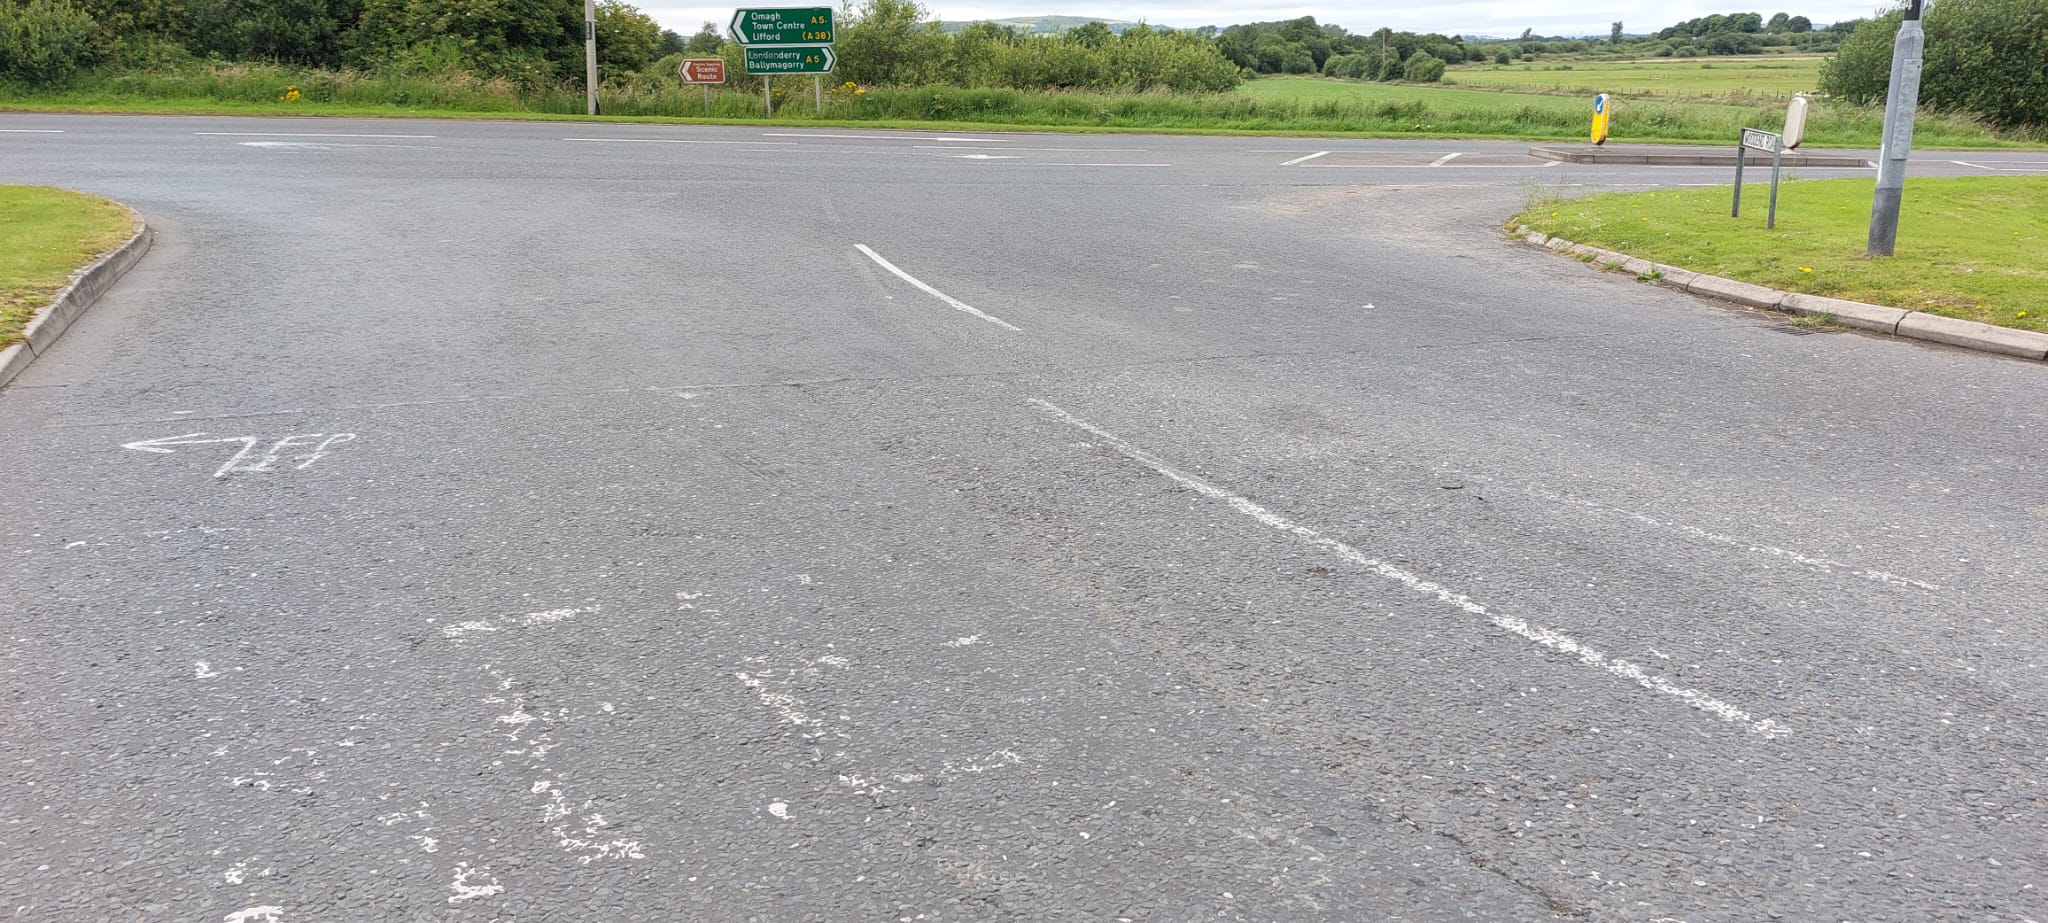 Call for review into disappearing road markings